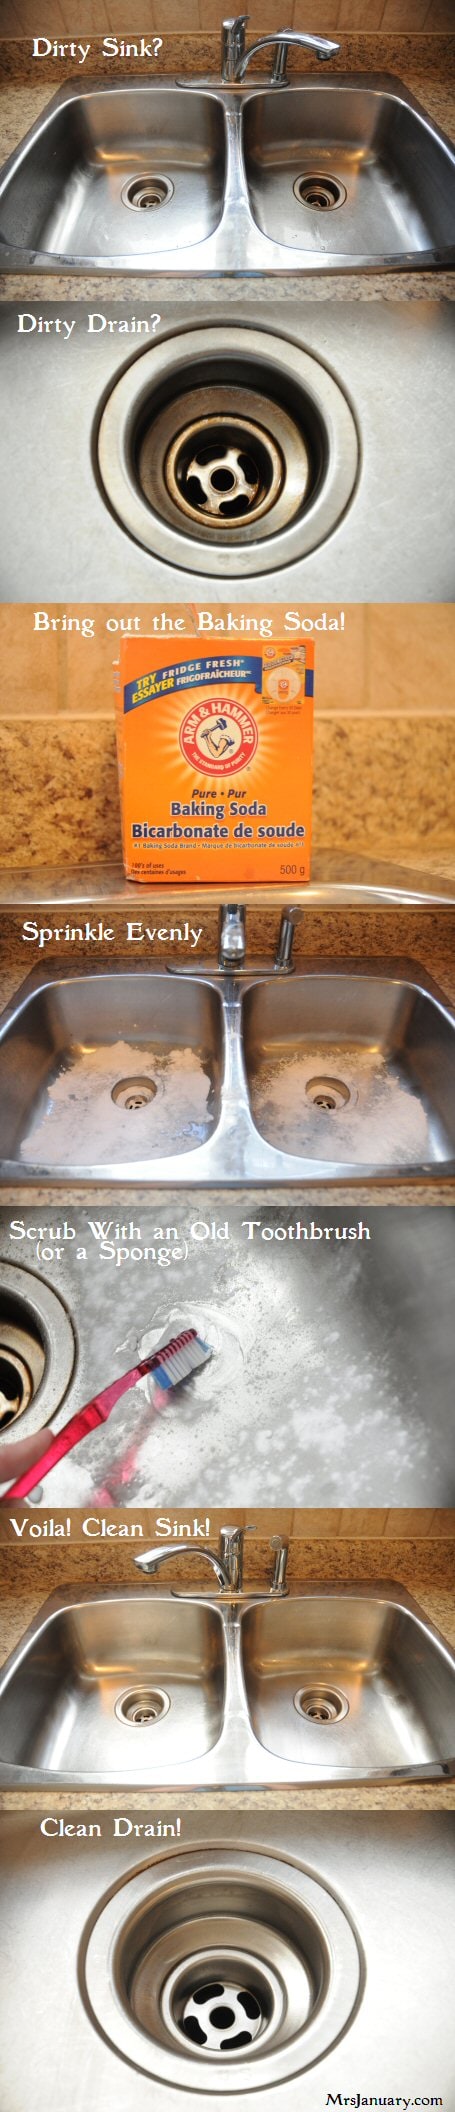 Hack #78: Clean your sink with baking soda